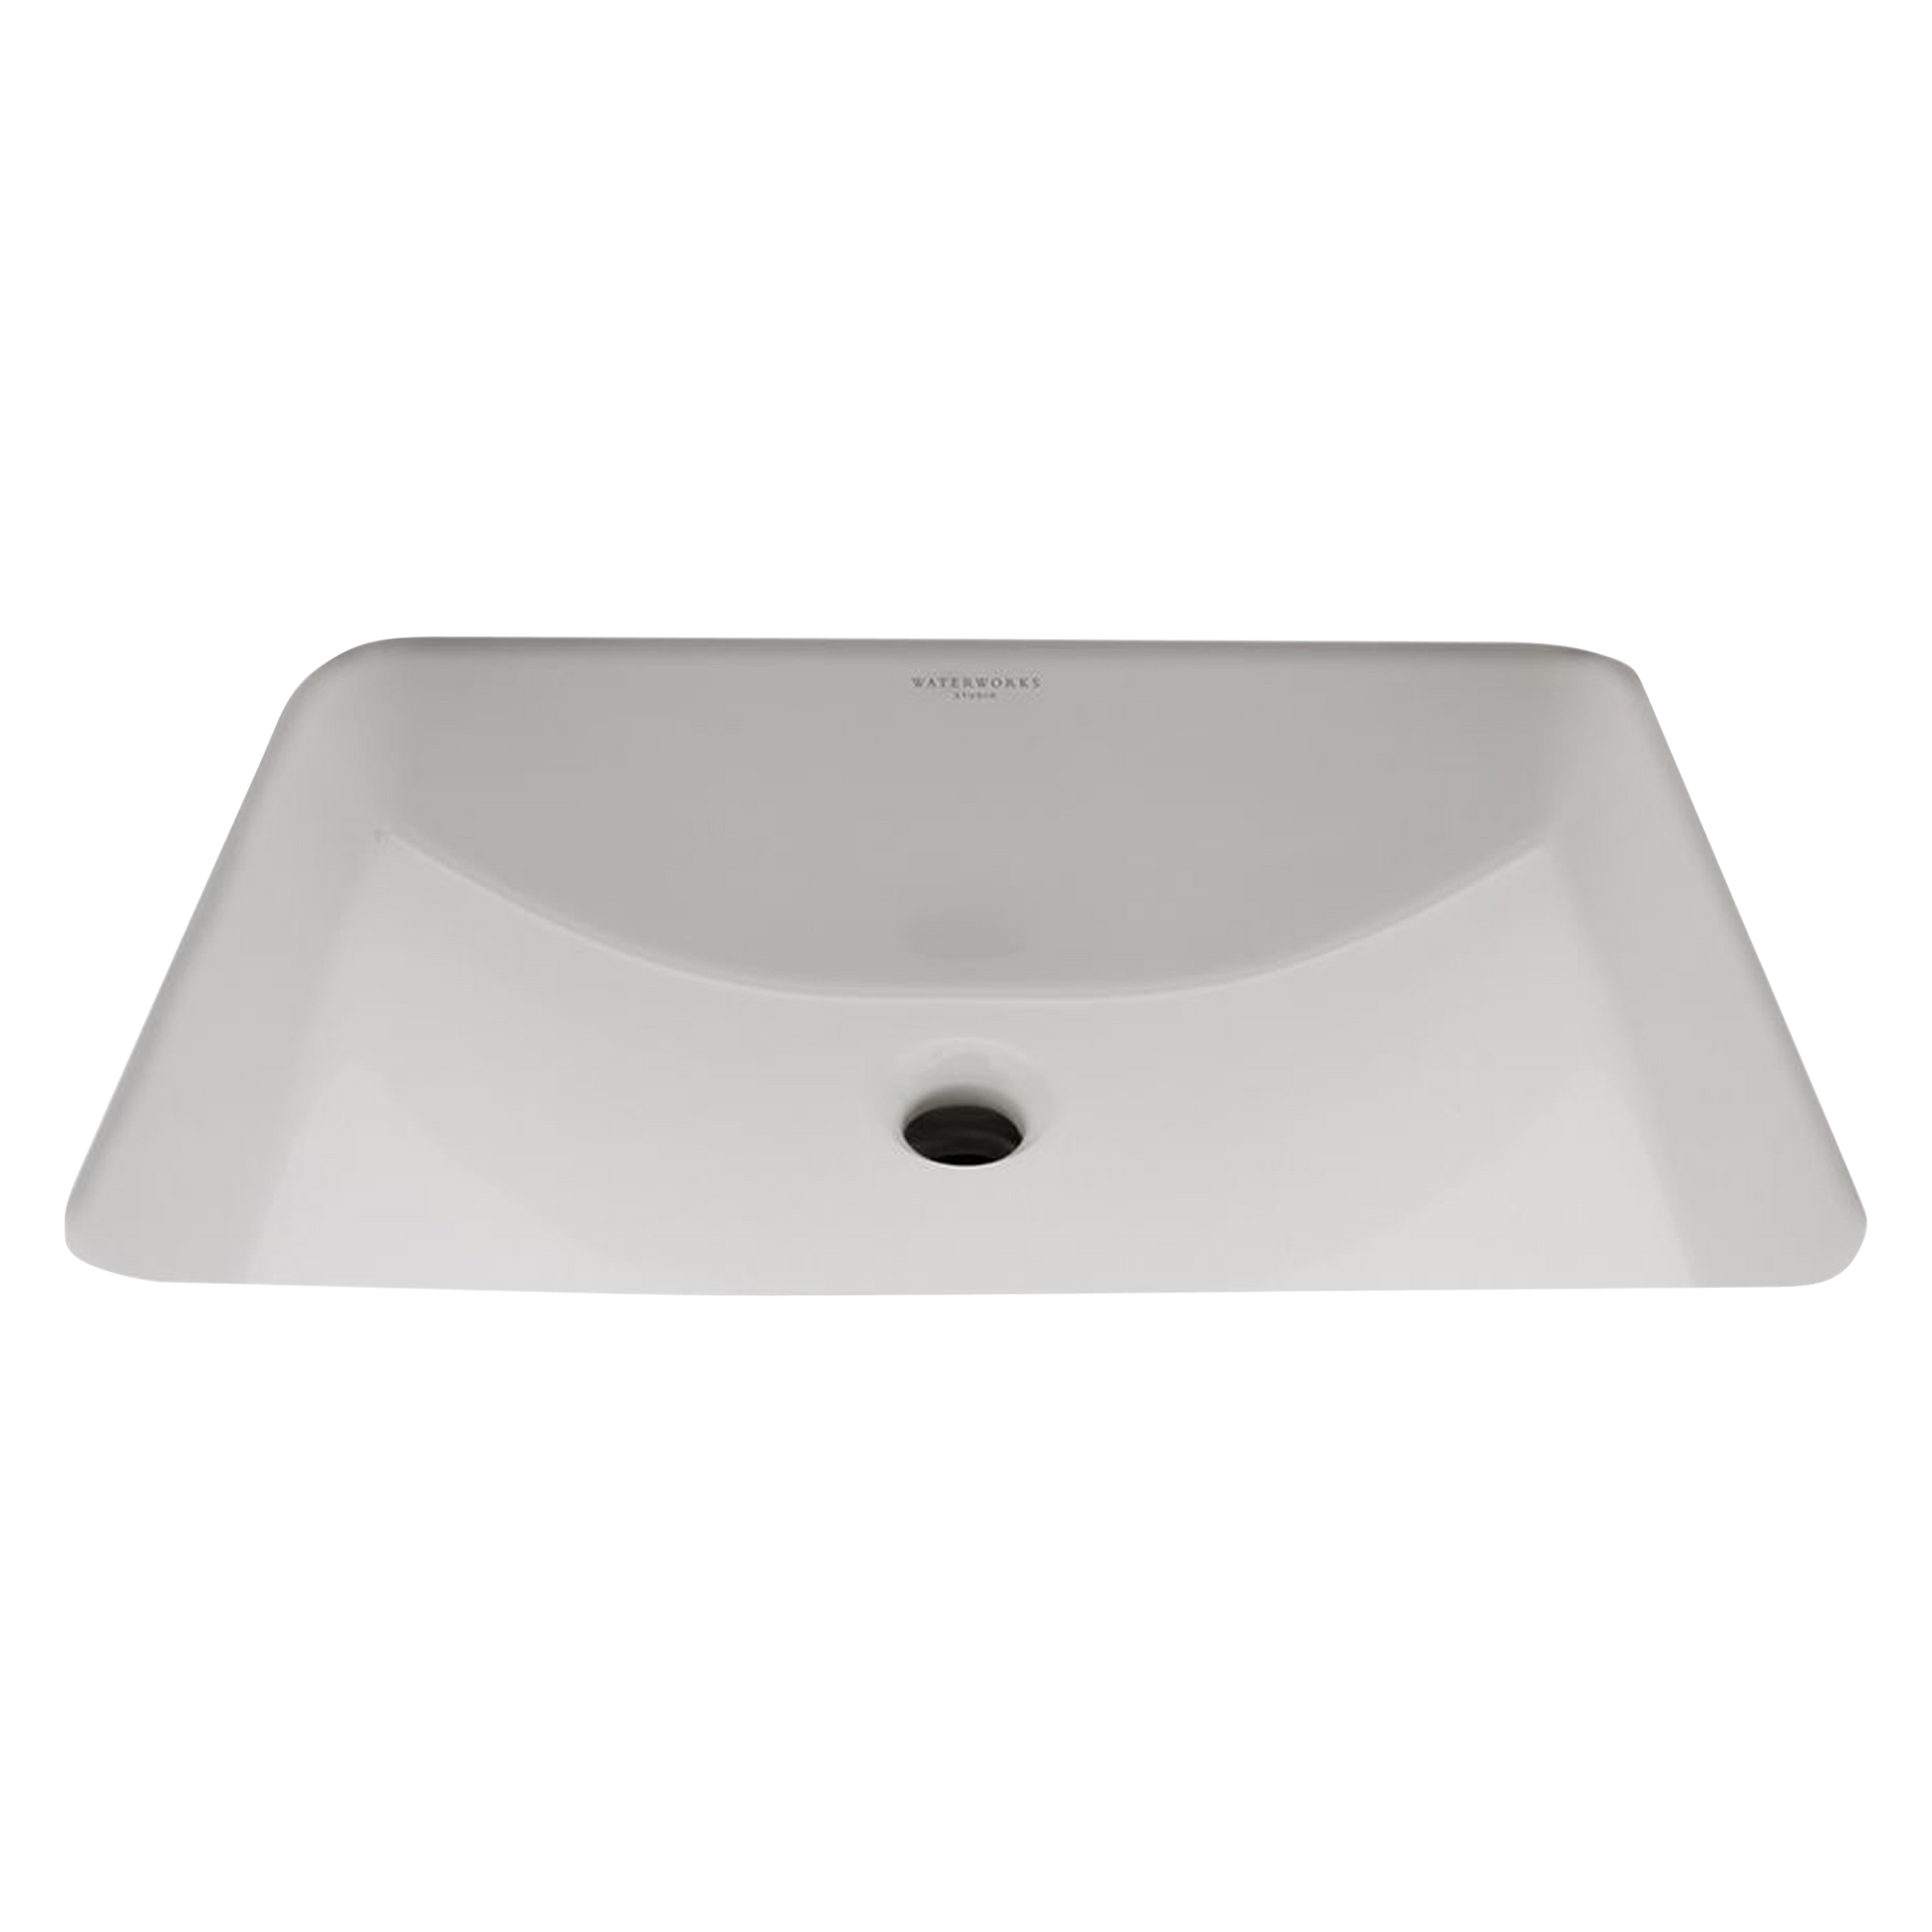 Simple in form and smaller in size, these rectangular and oval sinks bring practical elegance to a variety of settings.